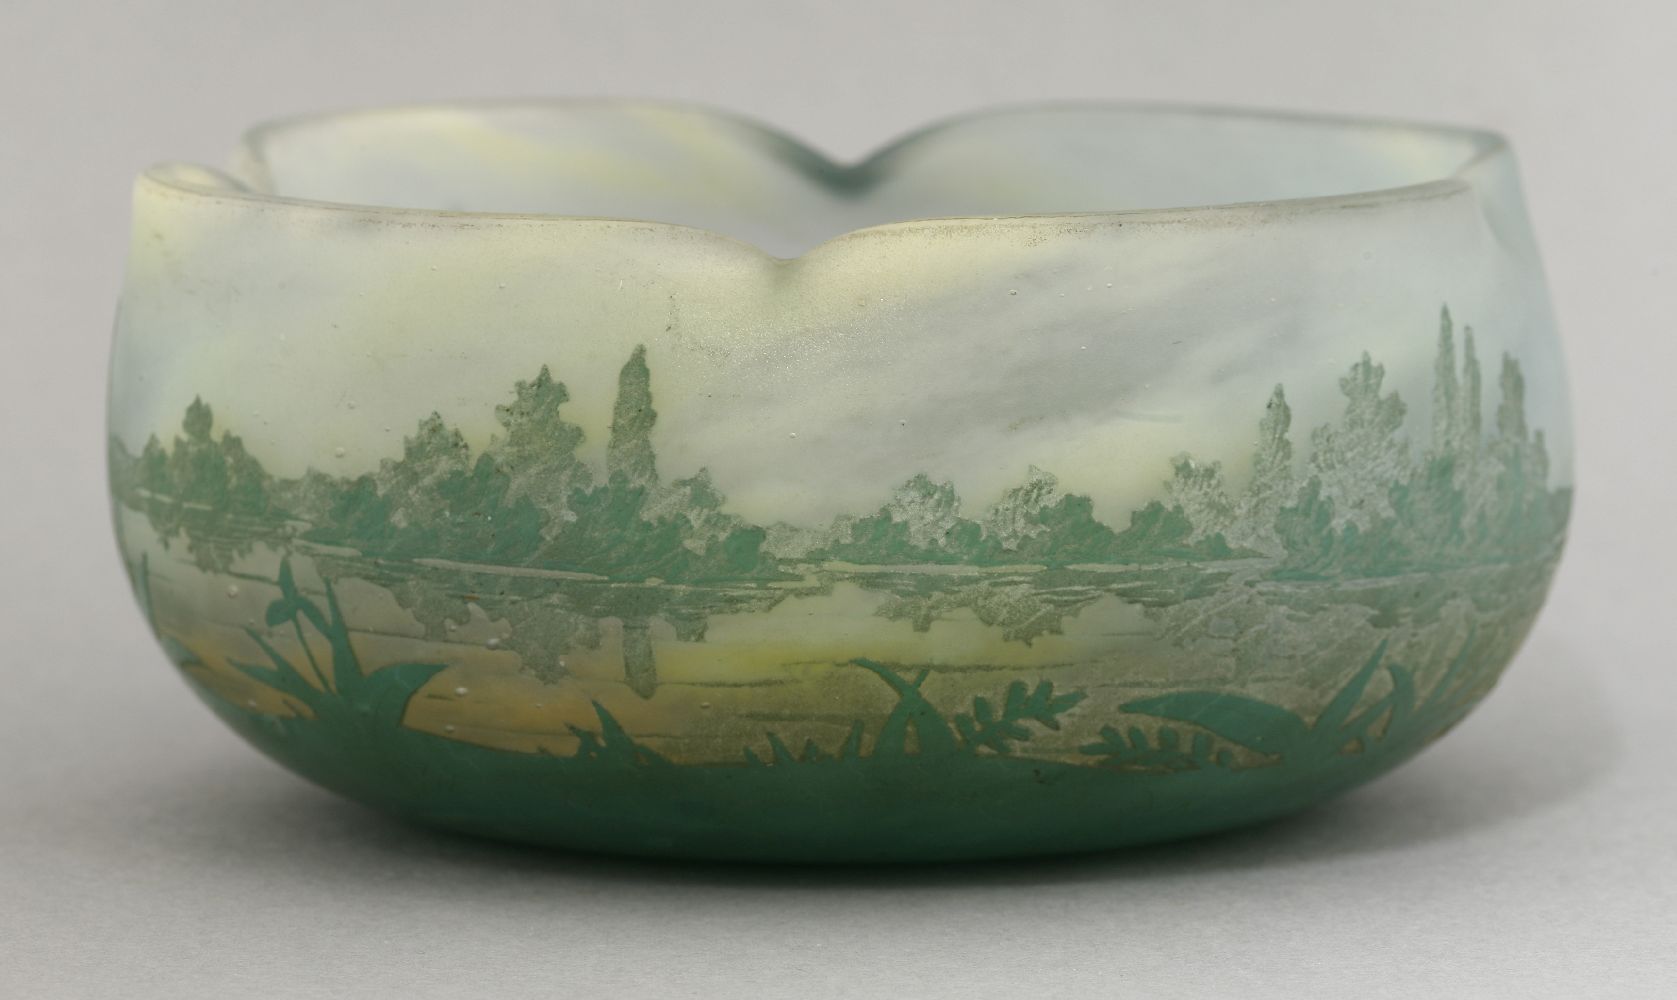 A Daum Nancy etched bowl, quatrelobed form and decorated with a river landscape with bushes and - Image 3 of 8